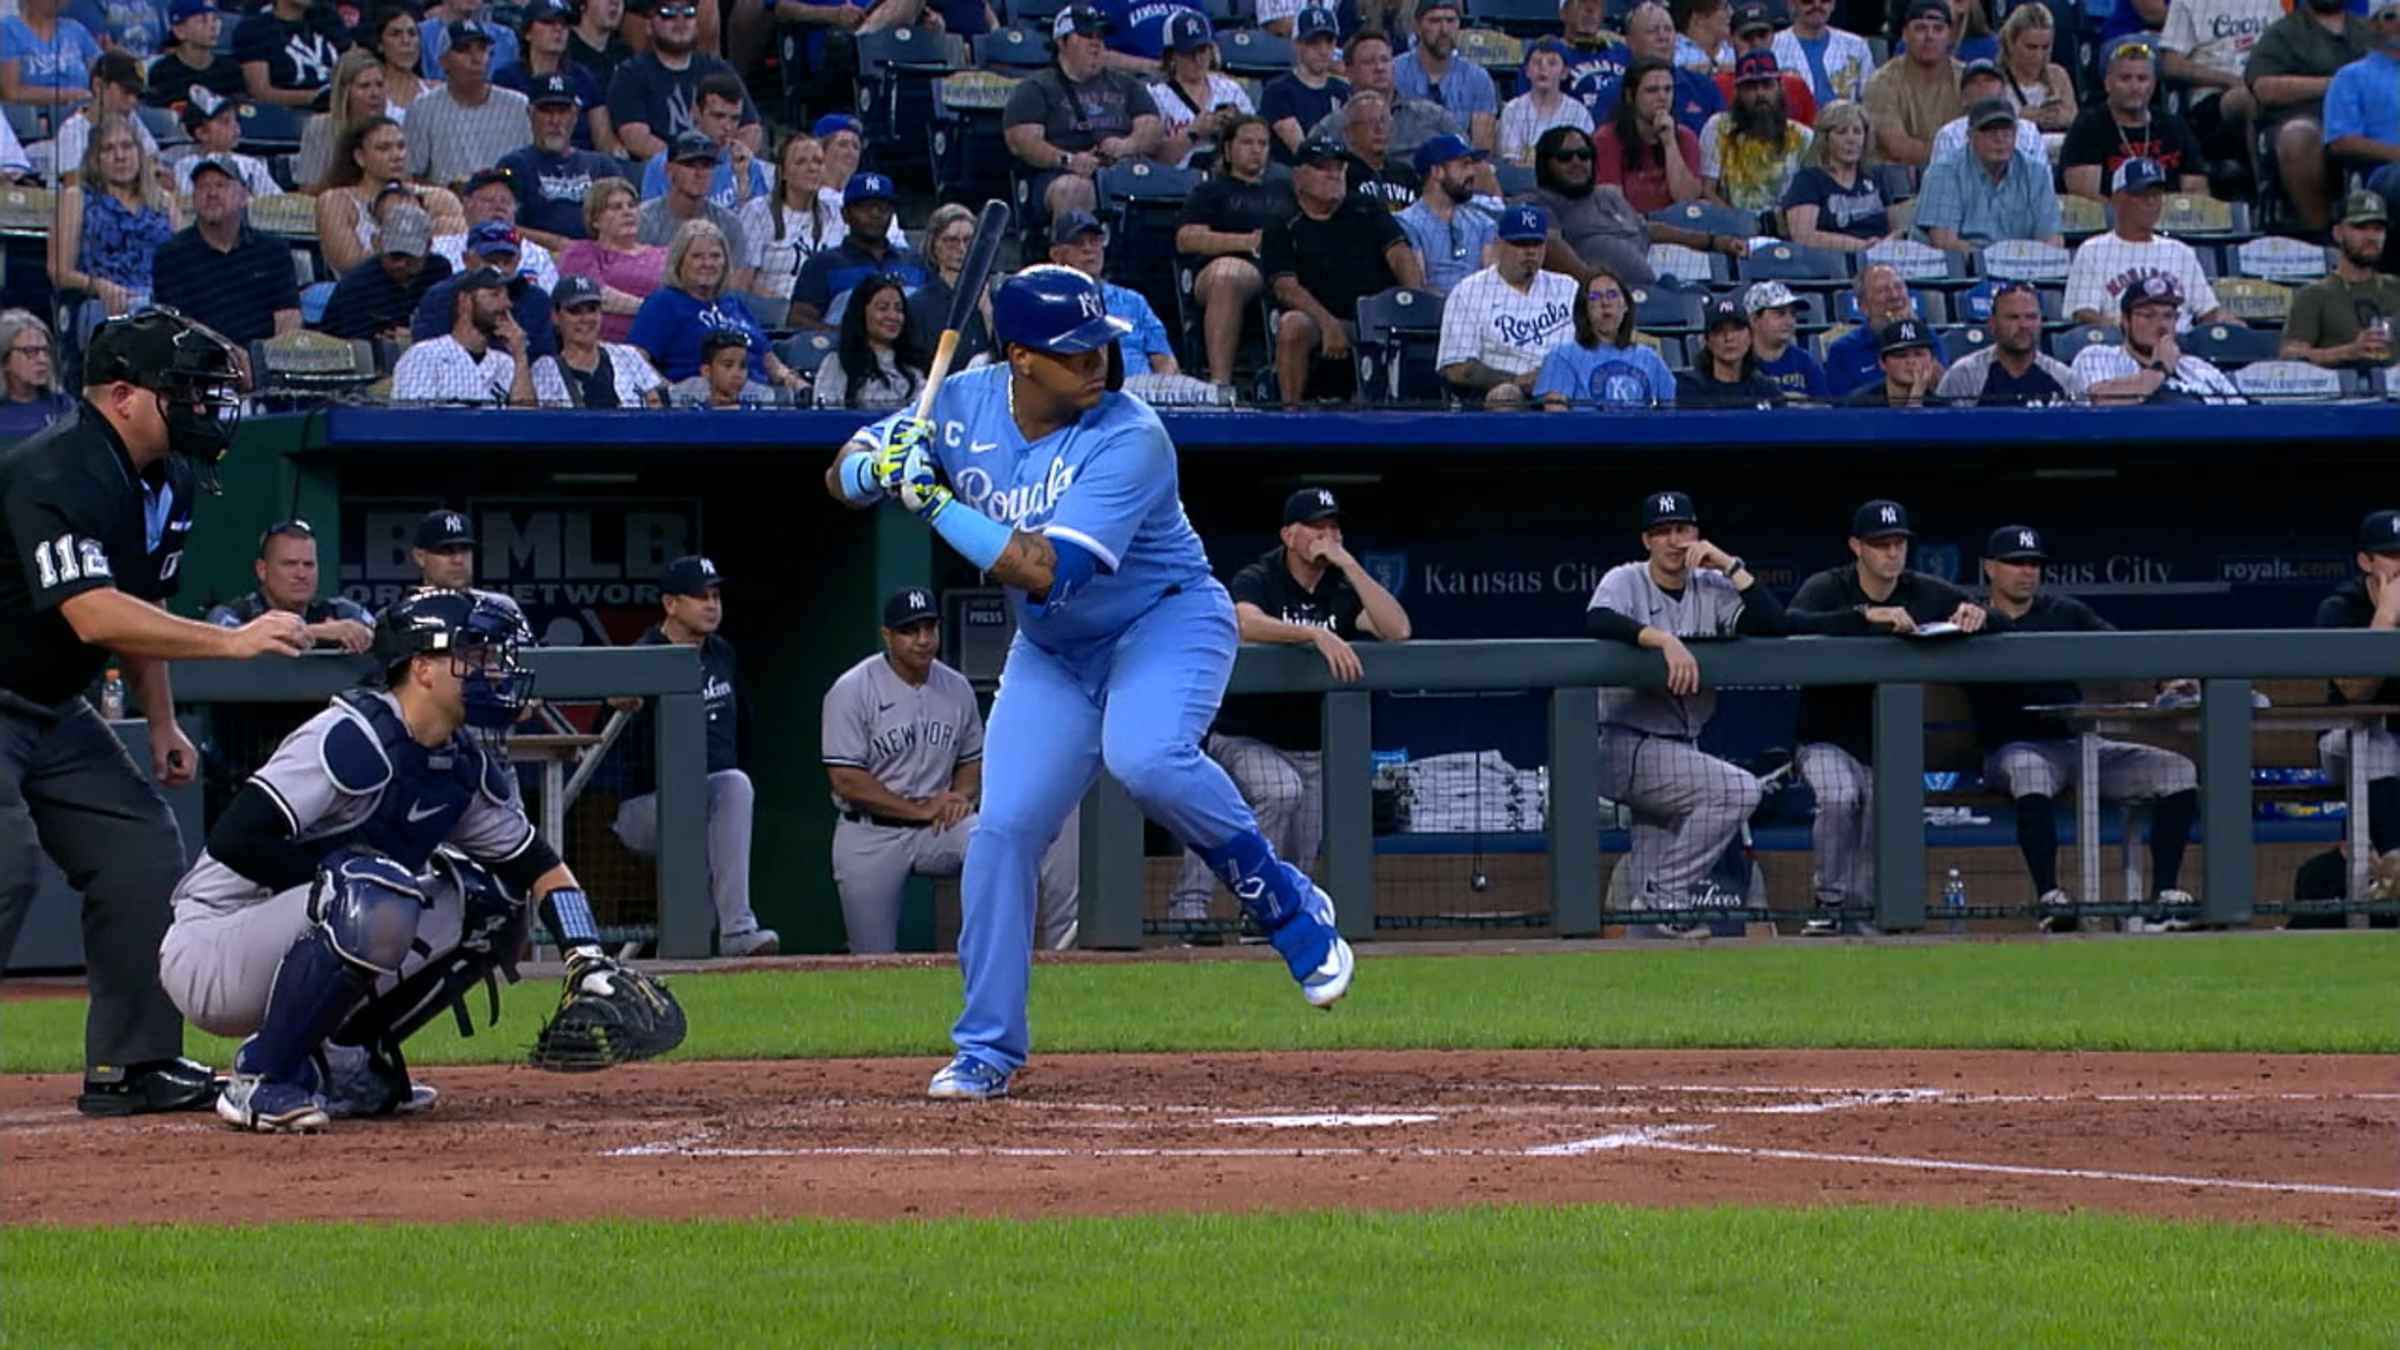 Salvador Perez Displays ELITE POWER, Crushes Homers to All Fields